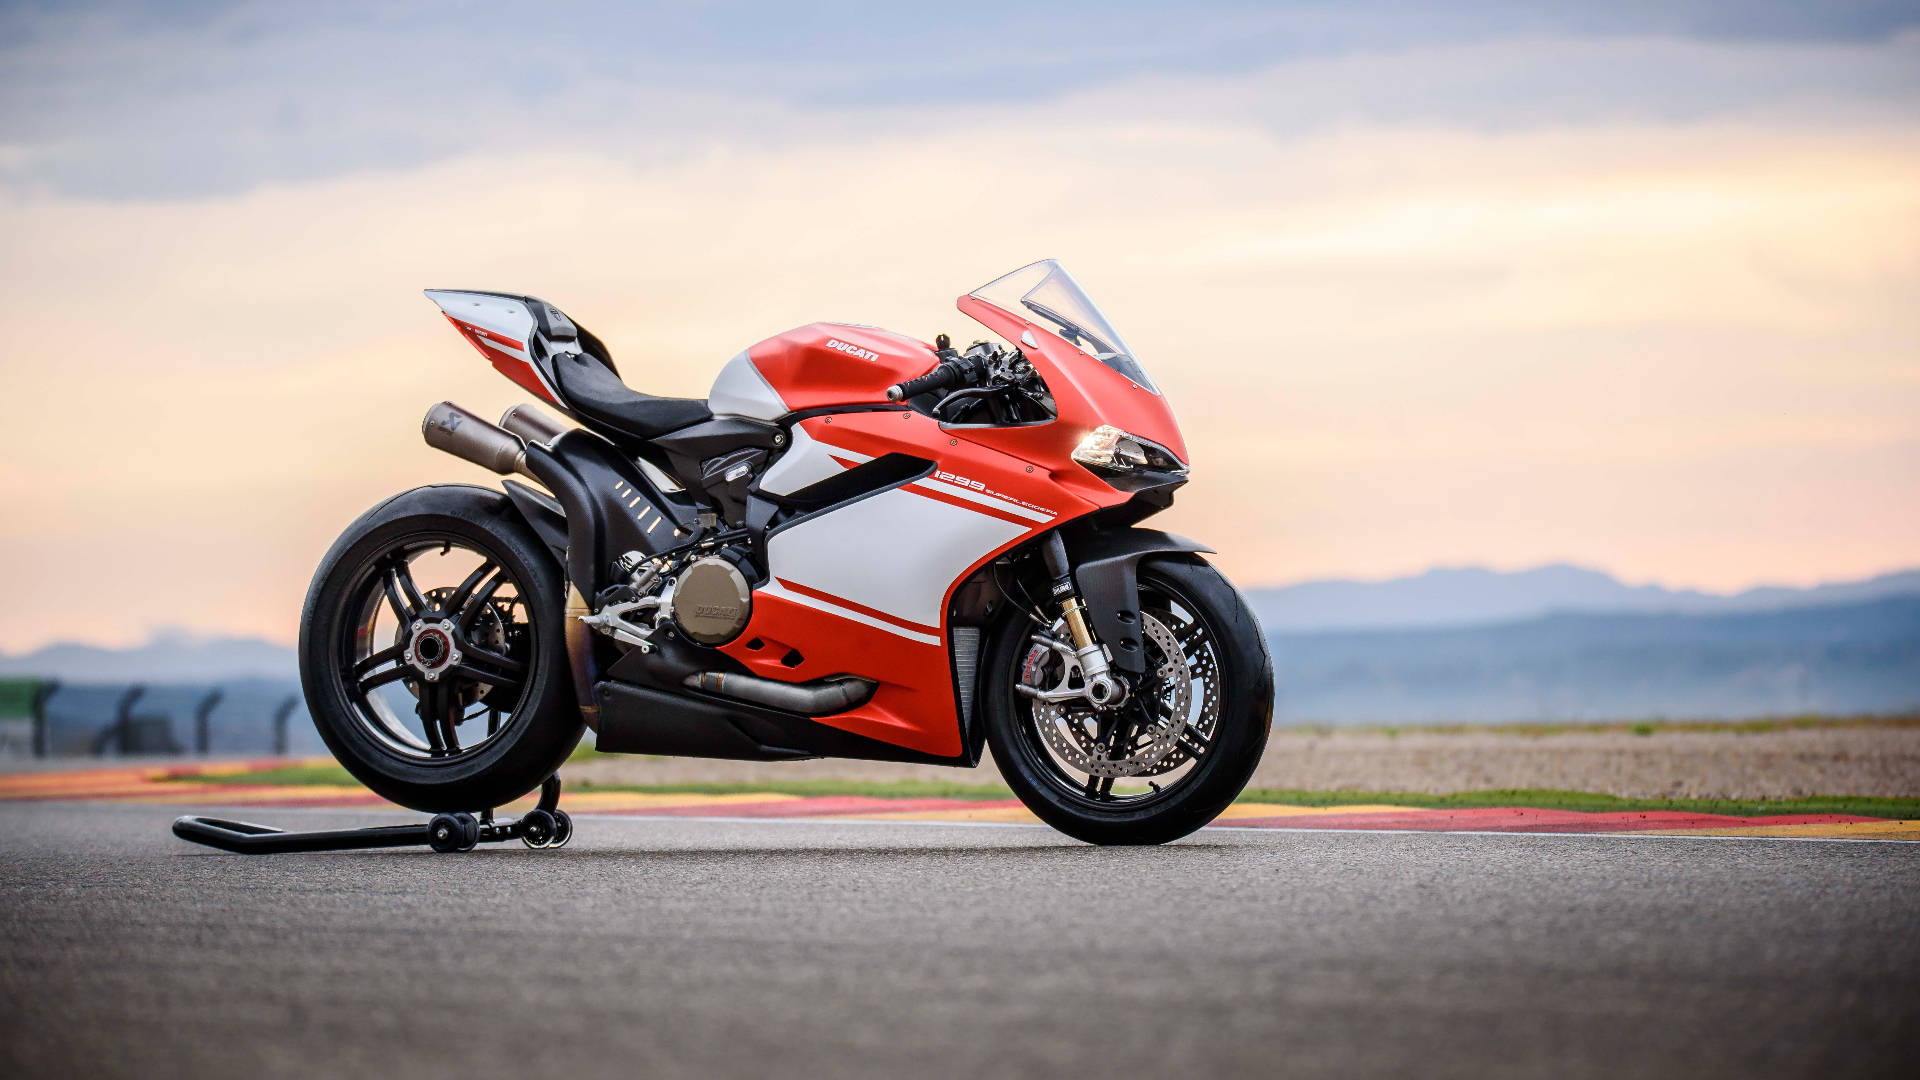 The Sporty And Sophisticated Ducati 1299 Superleggera Background